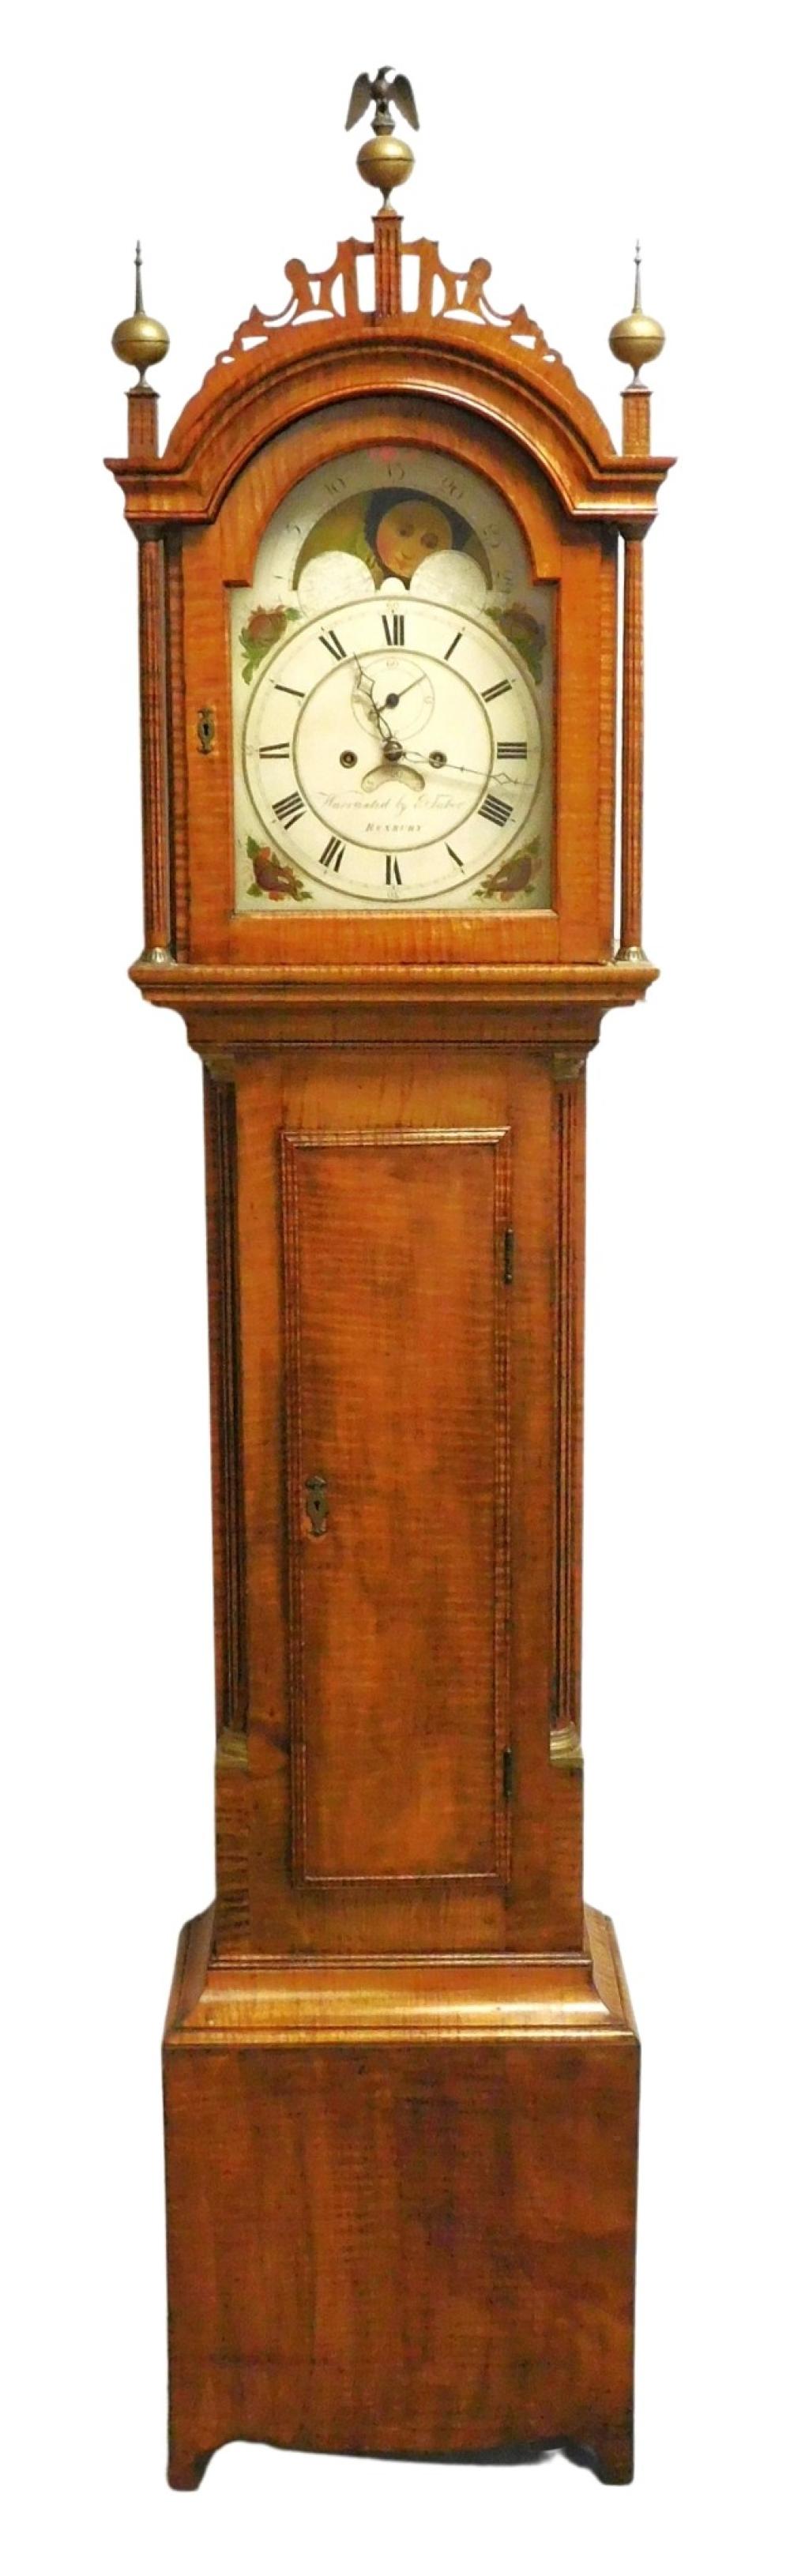  TALL CLOCK IN TIGER MAPLE BENCH 2e2d24